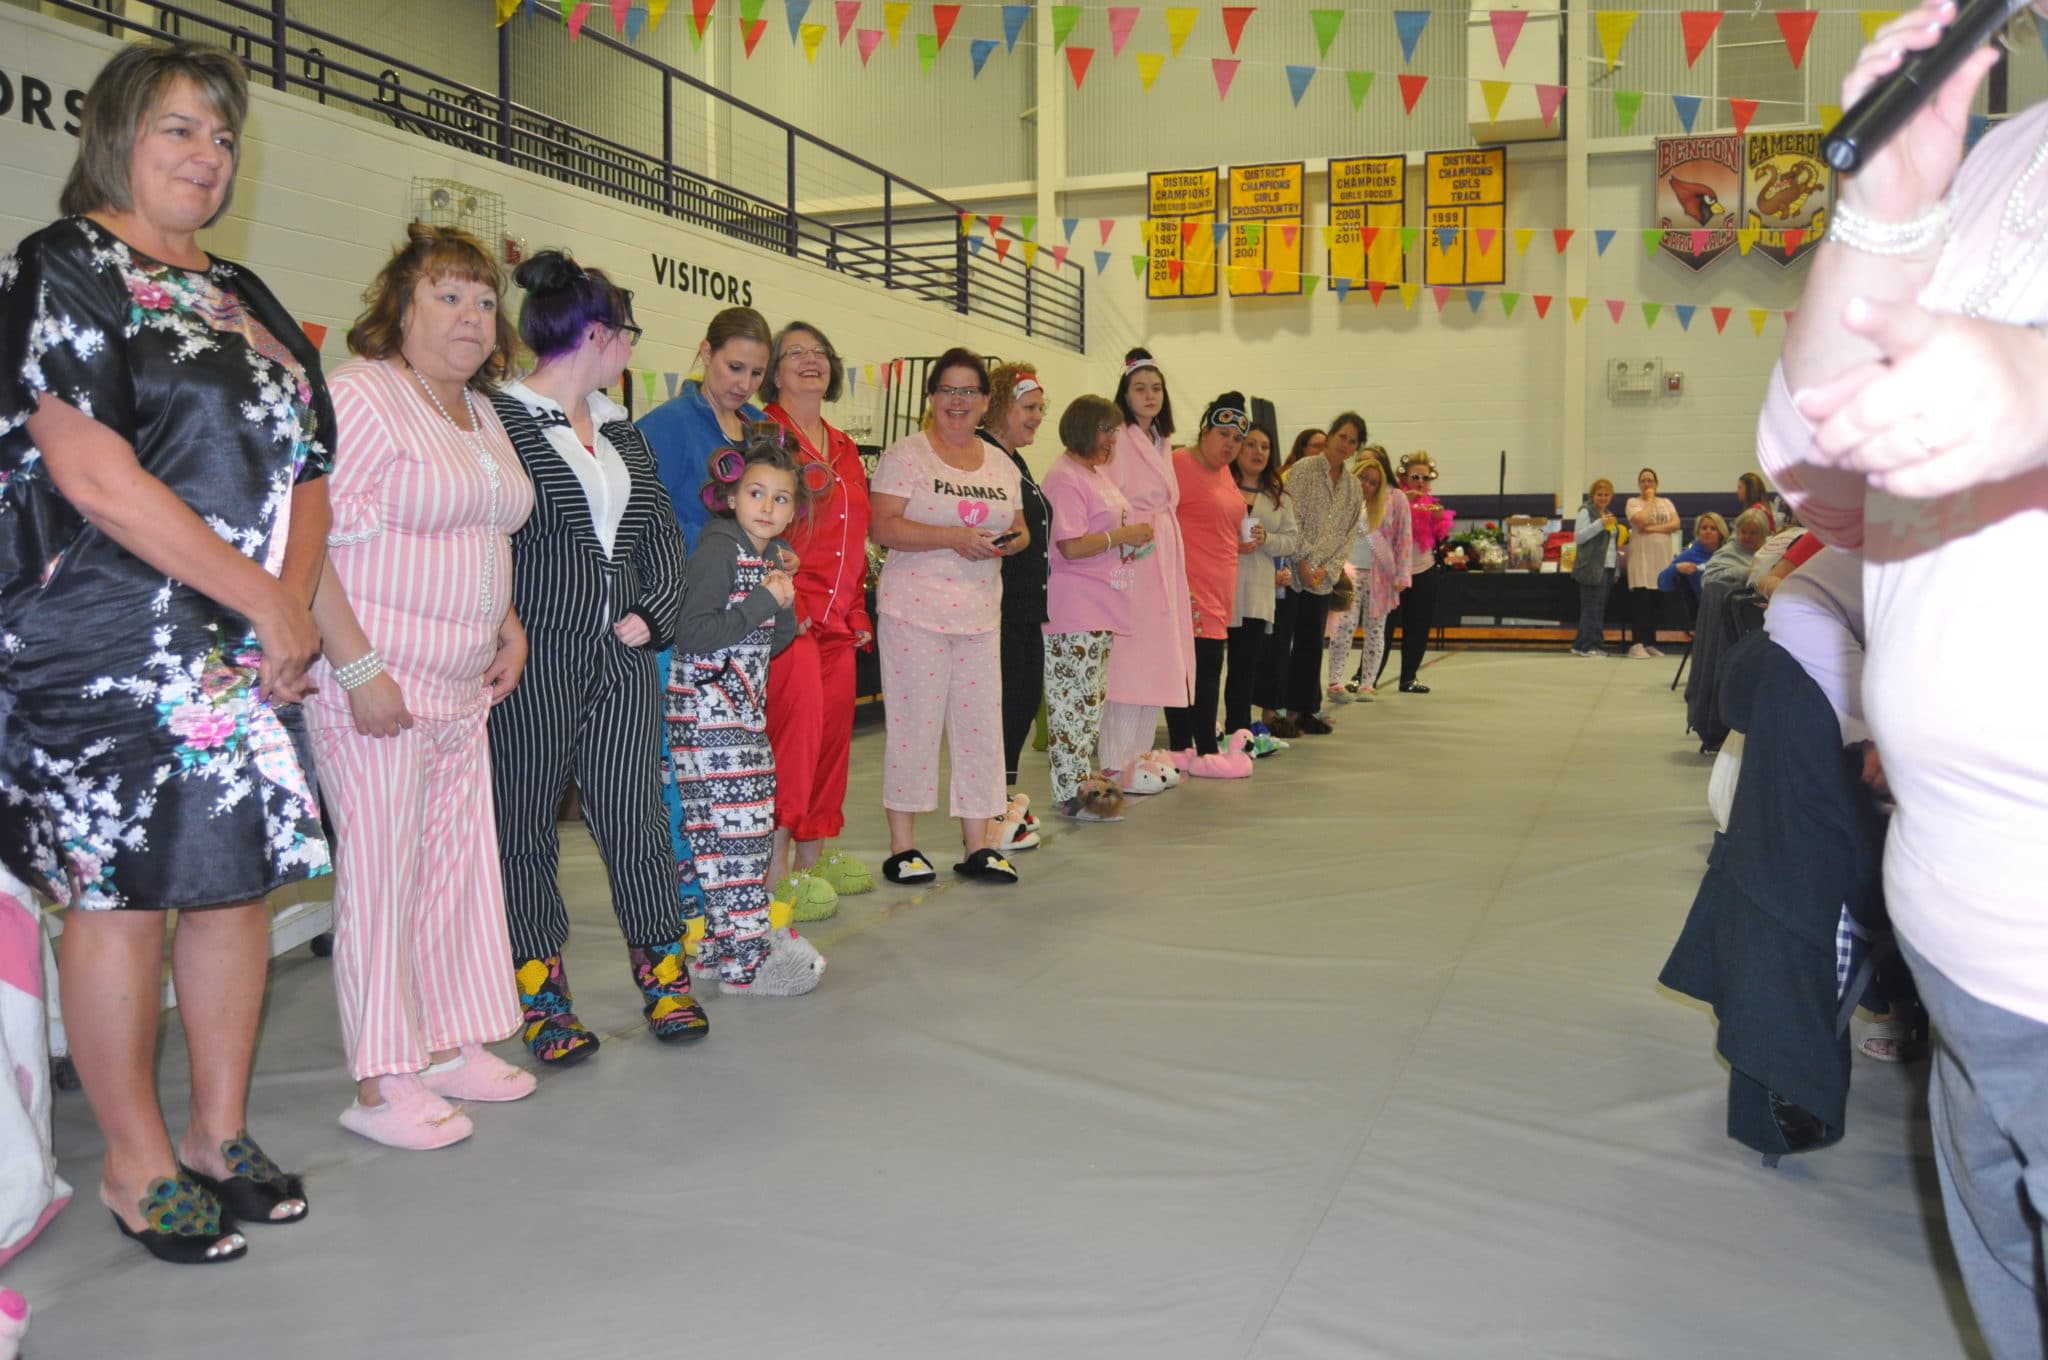 A group of people wearing pajamas form two lines and a tunnel